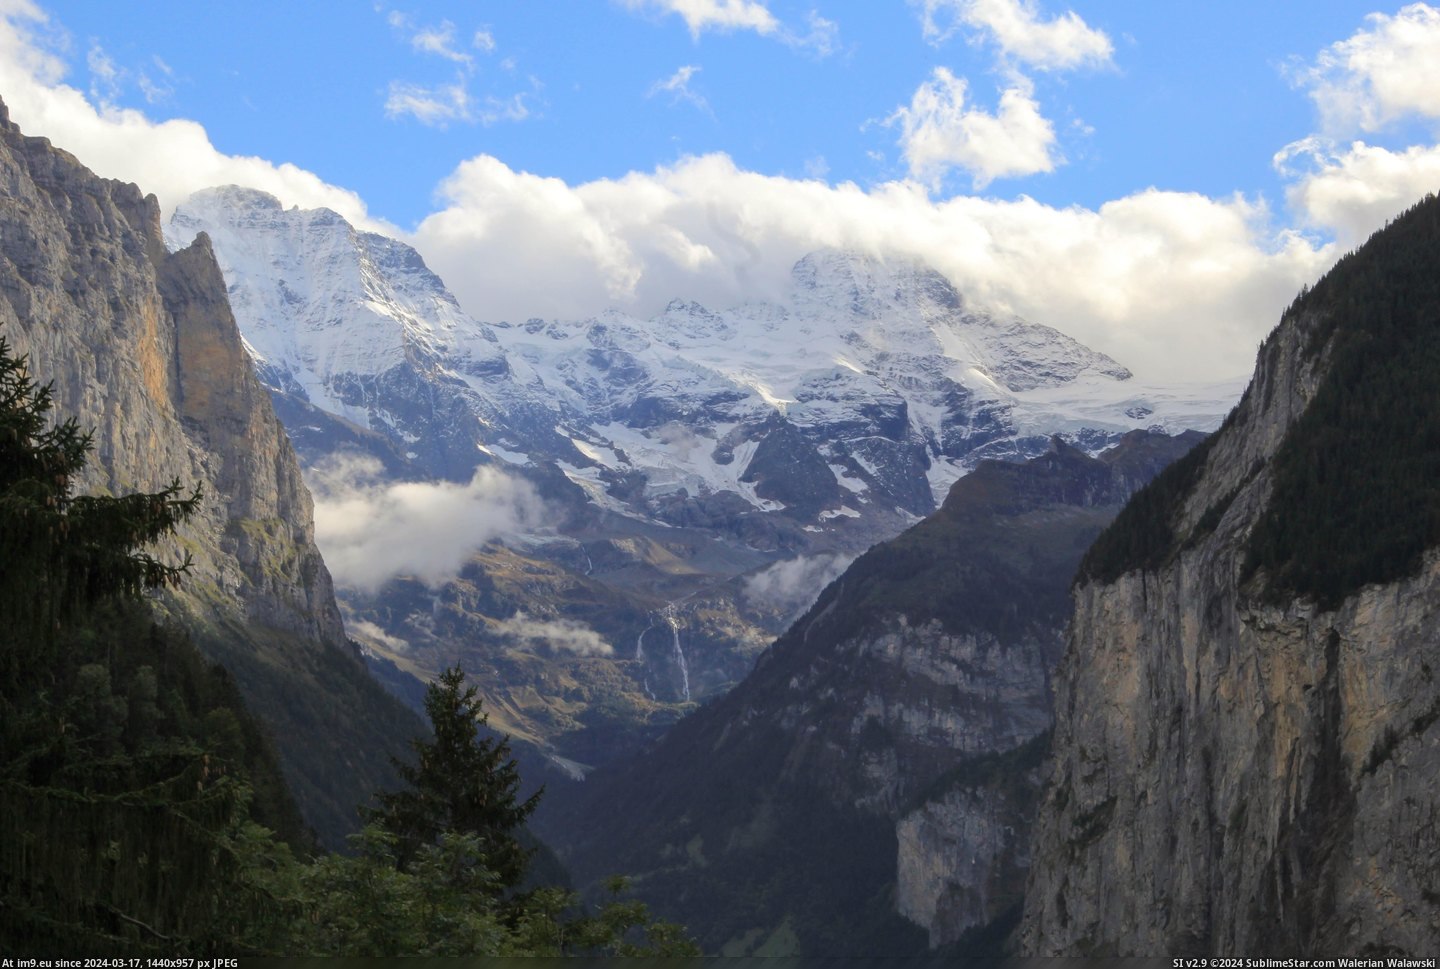 #Photo #Walking #Snapped #Lauterbrunnen #5184x3456 #Switzerland [Earthporn]  Snapped this photo in Switzerland somewhere between Lauterbrunnen and Wengen while walking. [5184x3456] Pic. (Image of album My r/EARTHPORN favs))